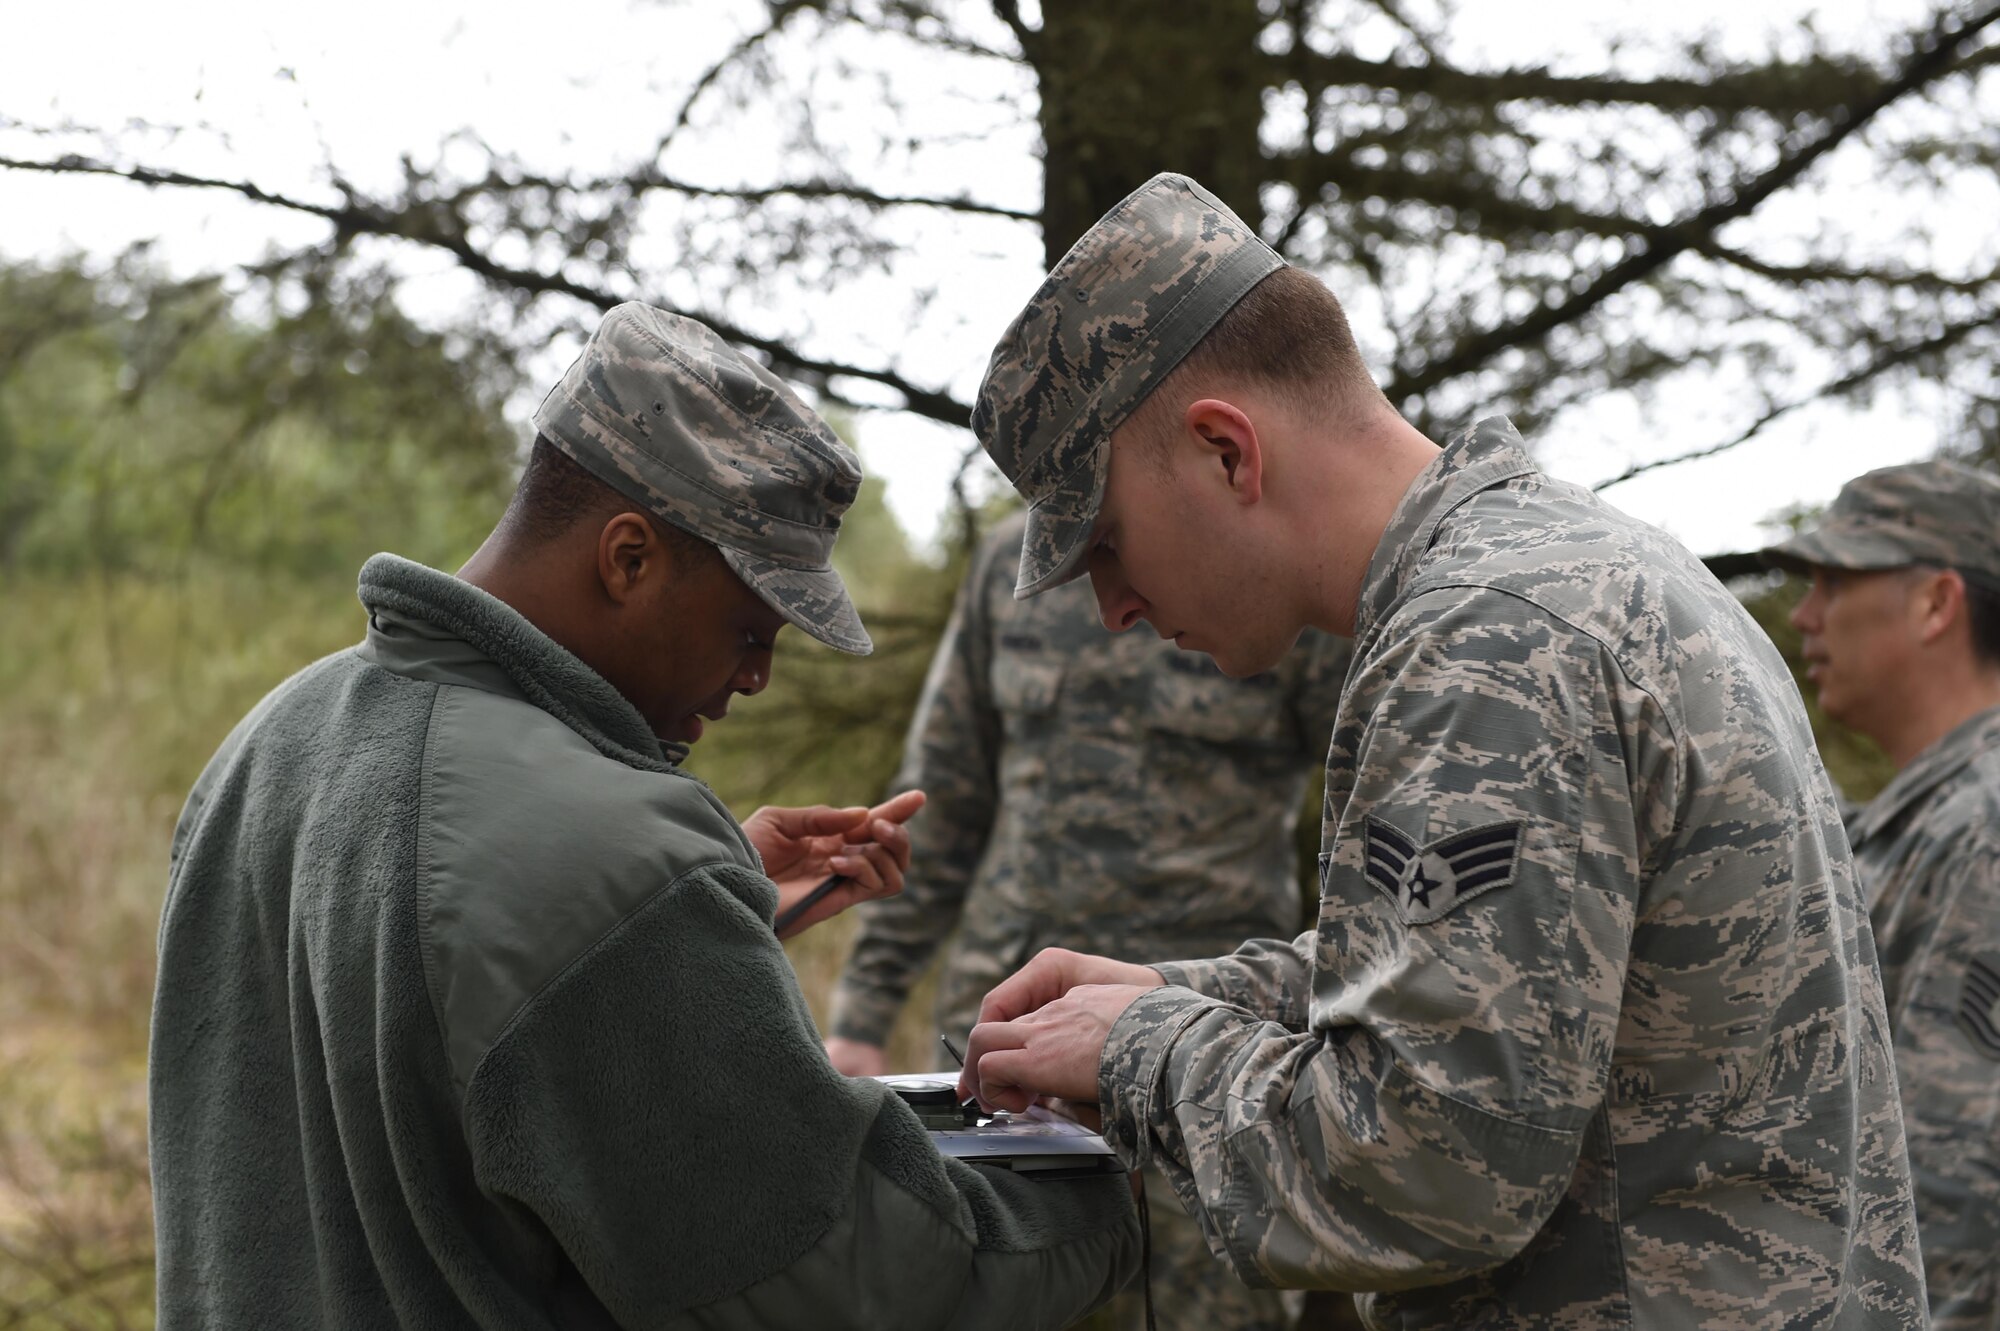 Members of the 627th Civil Engineer Squadron conduct land navigation training on Joint Base Lewis-McChord, Wash., Feb. 16, 2017. 50 Airmen were split up into nine teams and used a compass and azimuth to navigate to three different coordinates and back to the start. (U.S. Air Force photo/Staff Sgt. Naomi Shipley)